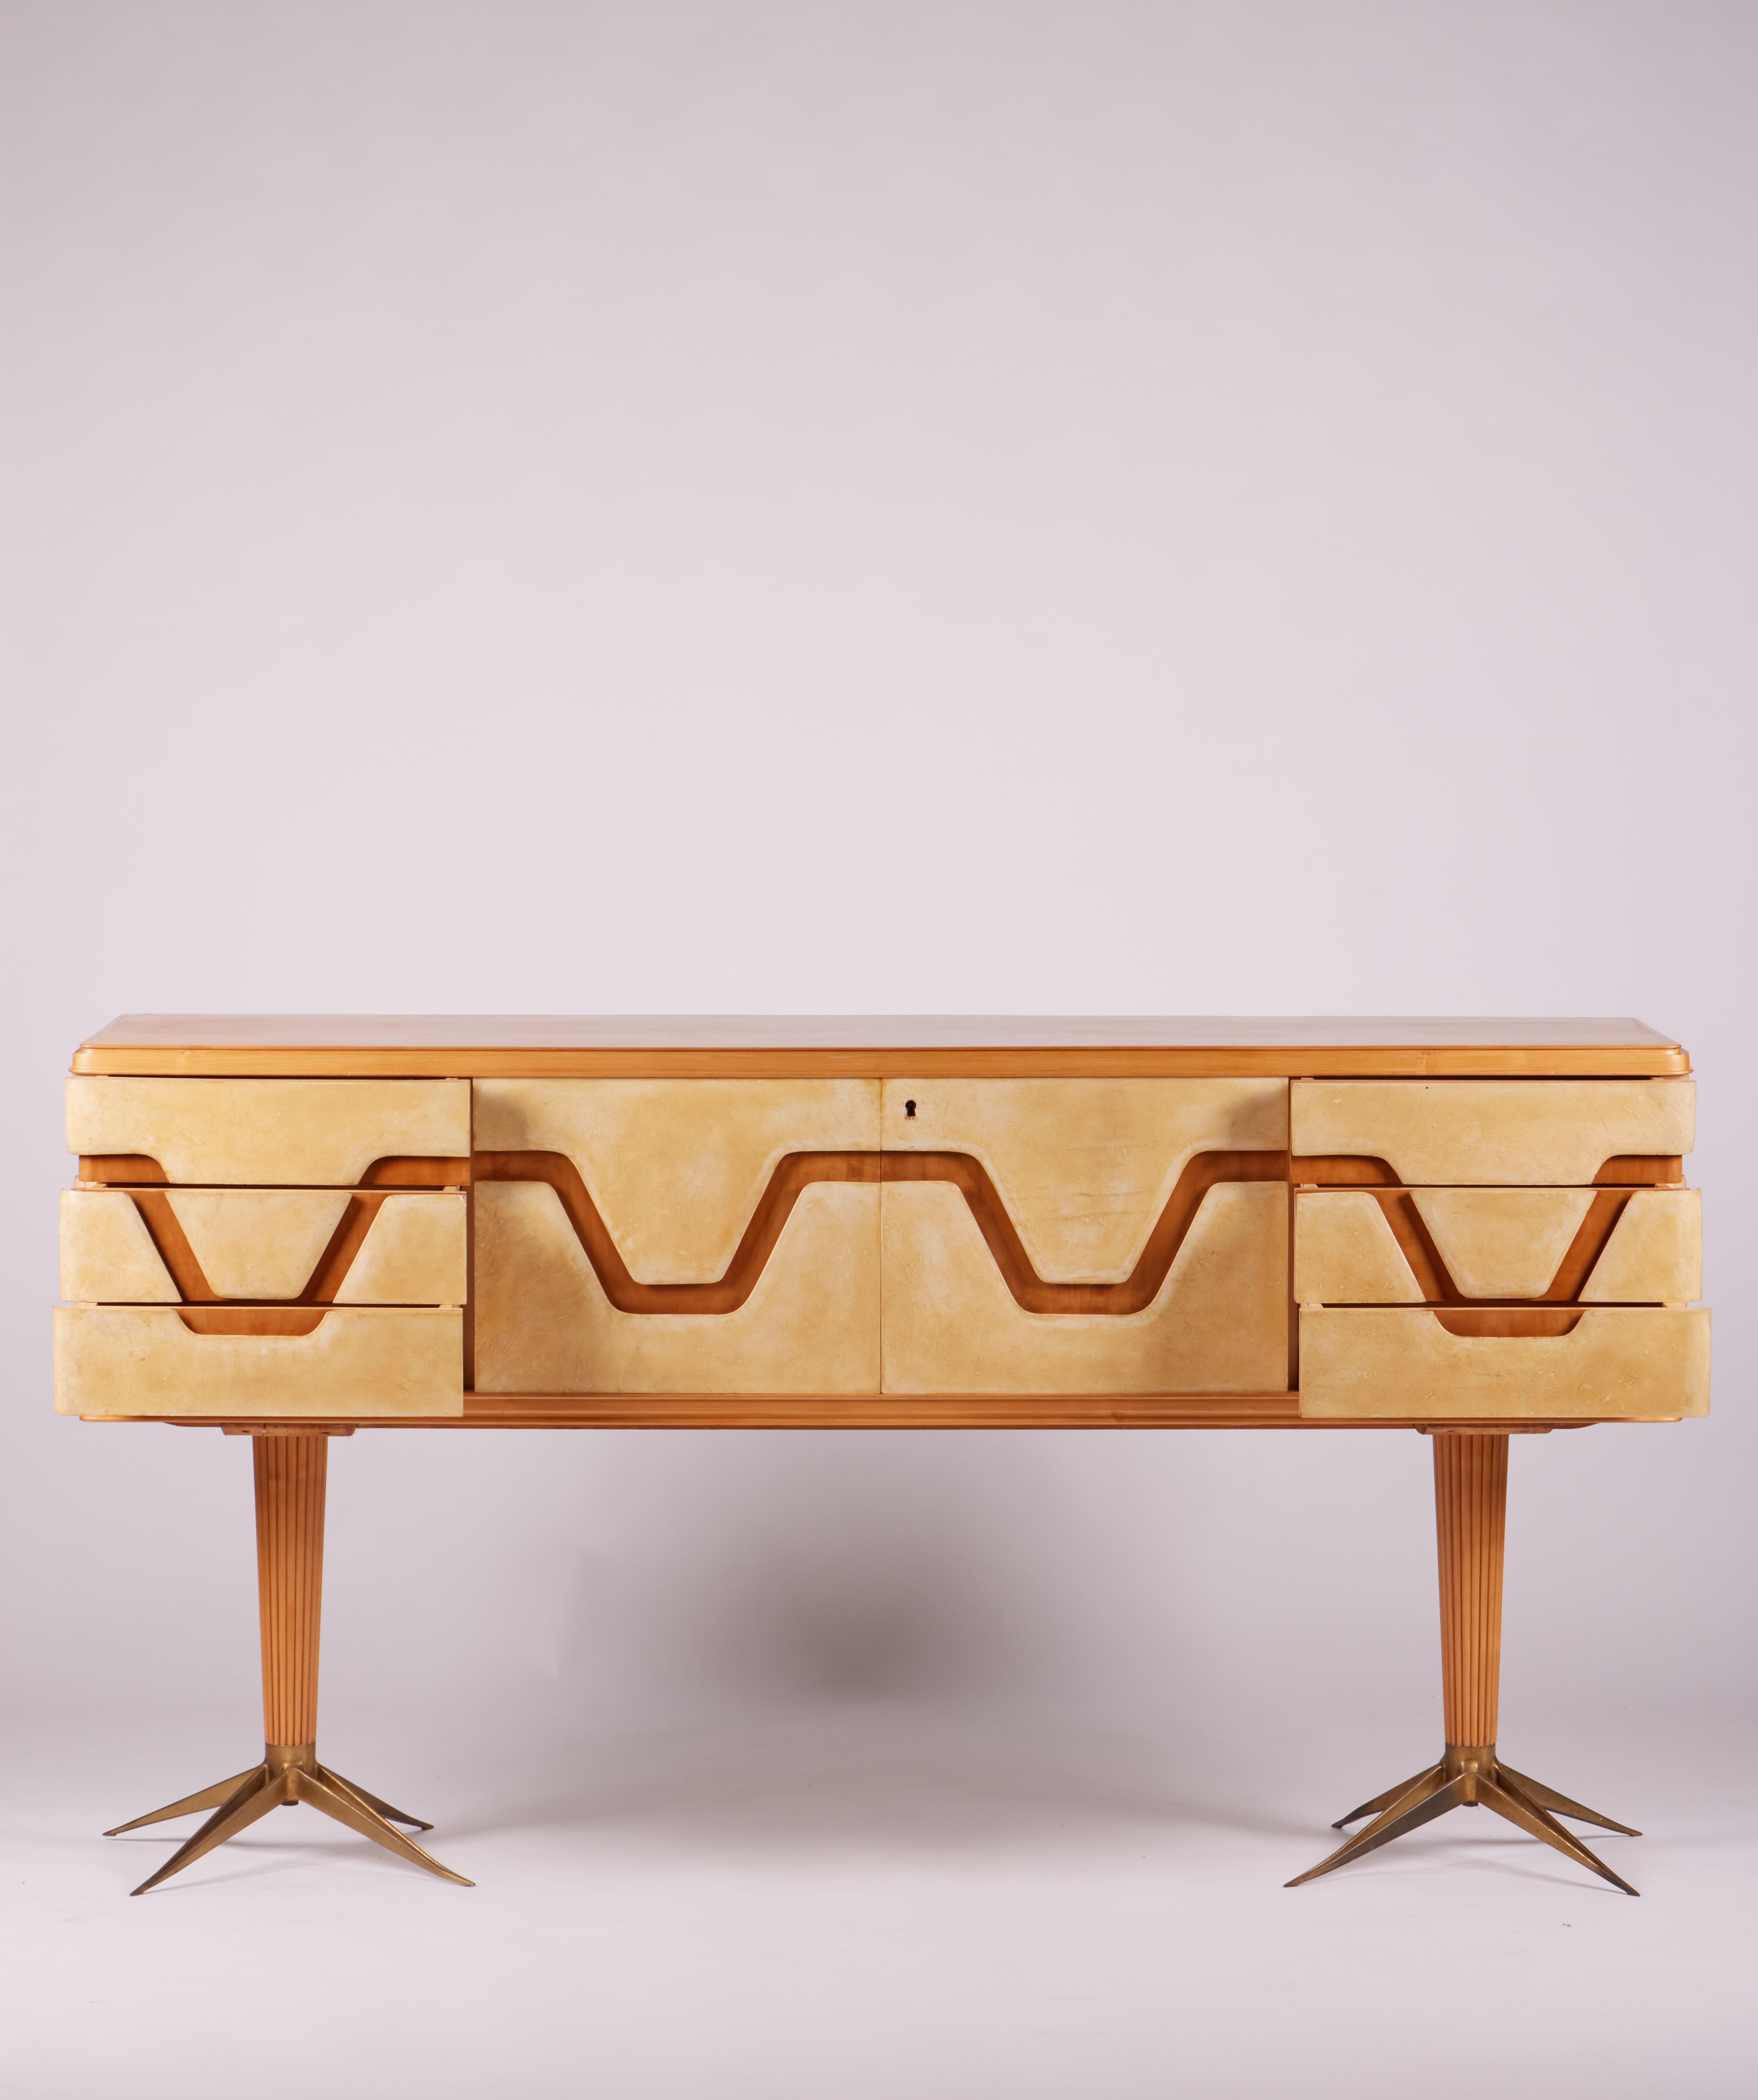 Italian Midcentury Parchment and Walnut Sideboard with Brass Legs, 1940s For Sale 4